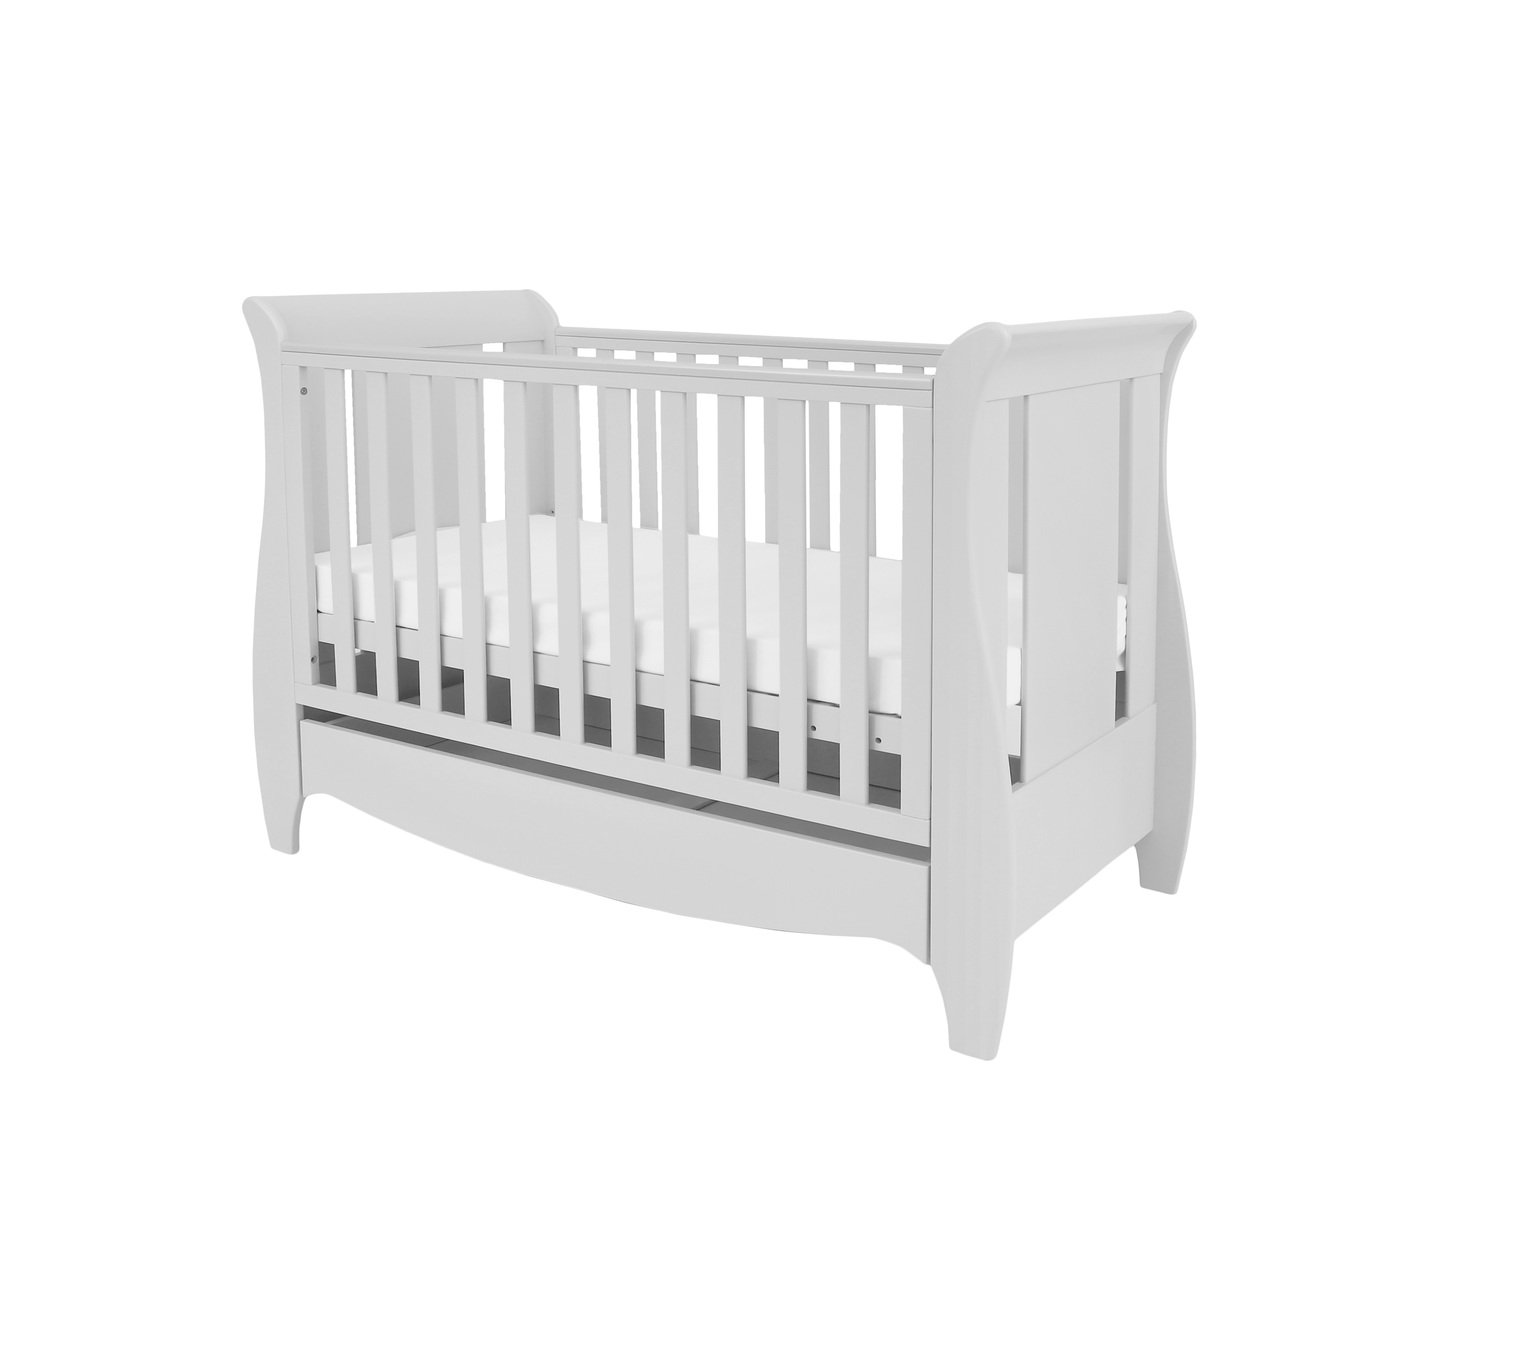 Tutti Bambini Roma Mini Sleigh Cot Bed and Drawer Review